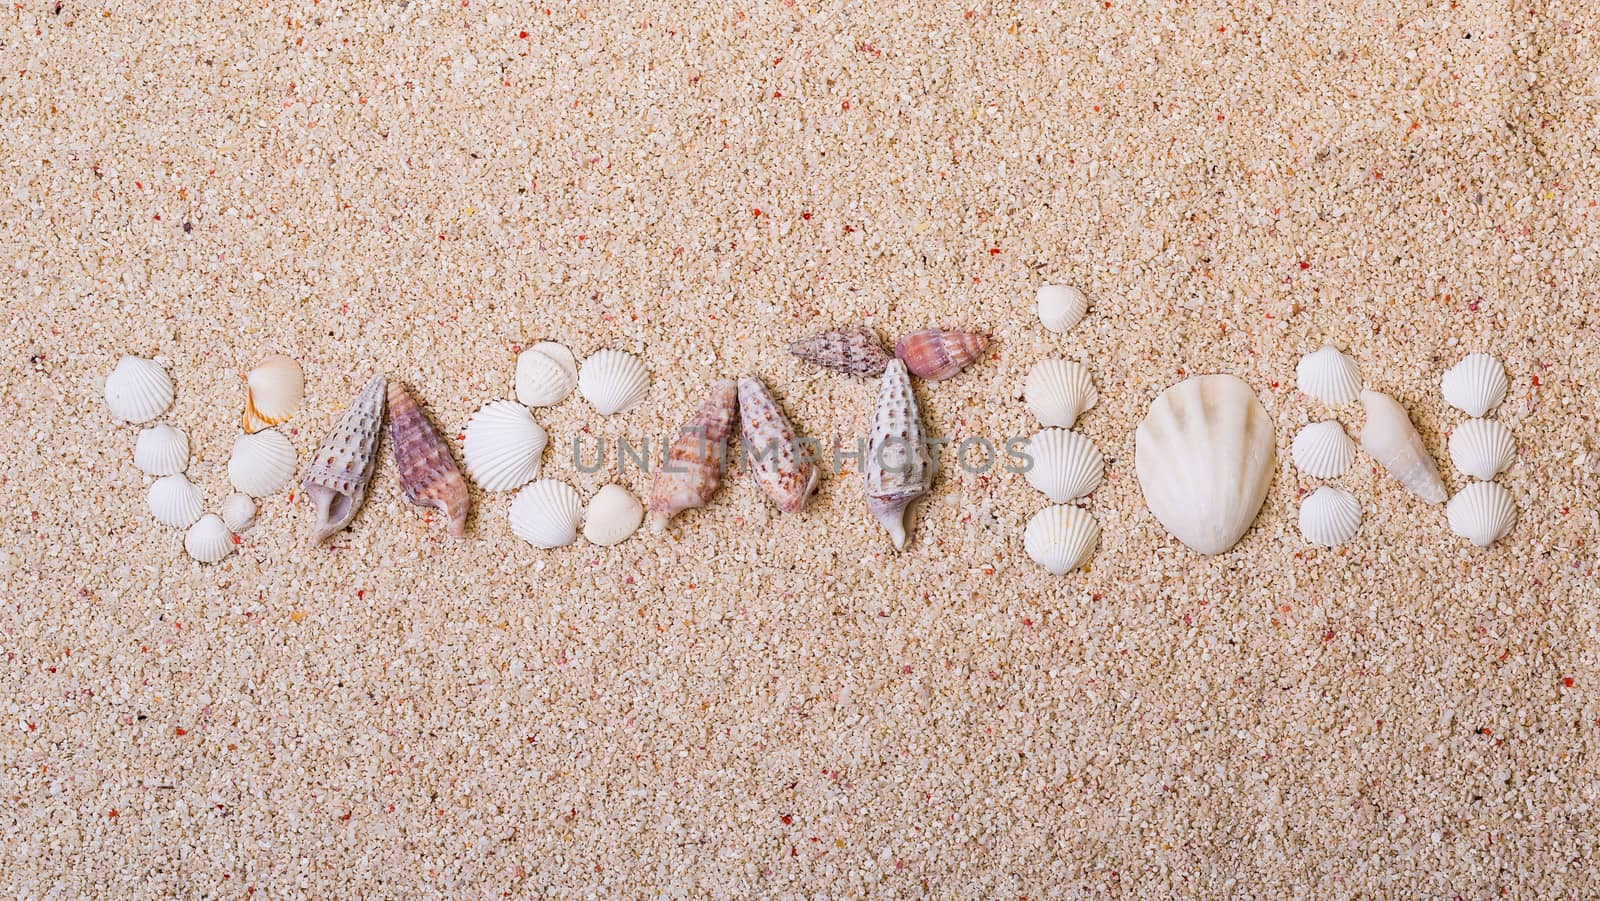 Title "vacation" from sea shells with coral sand by Discovod